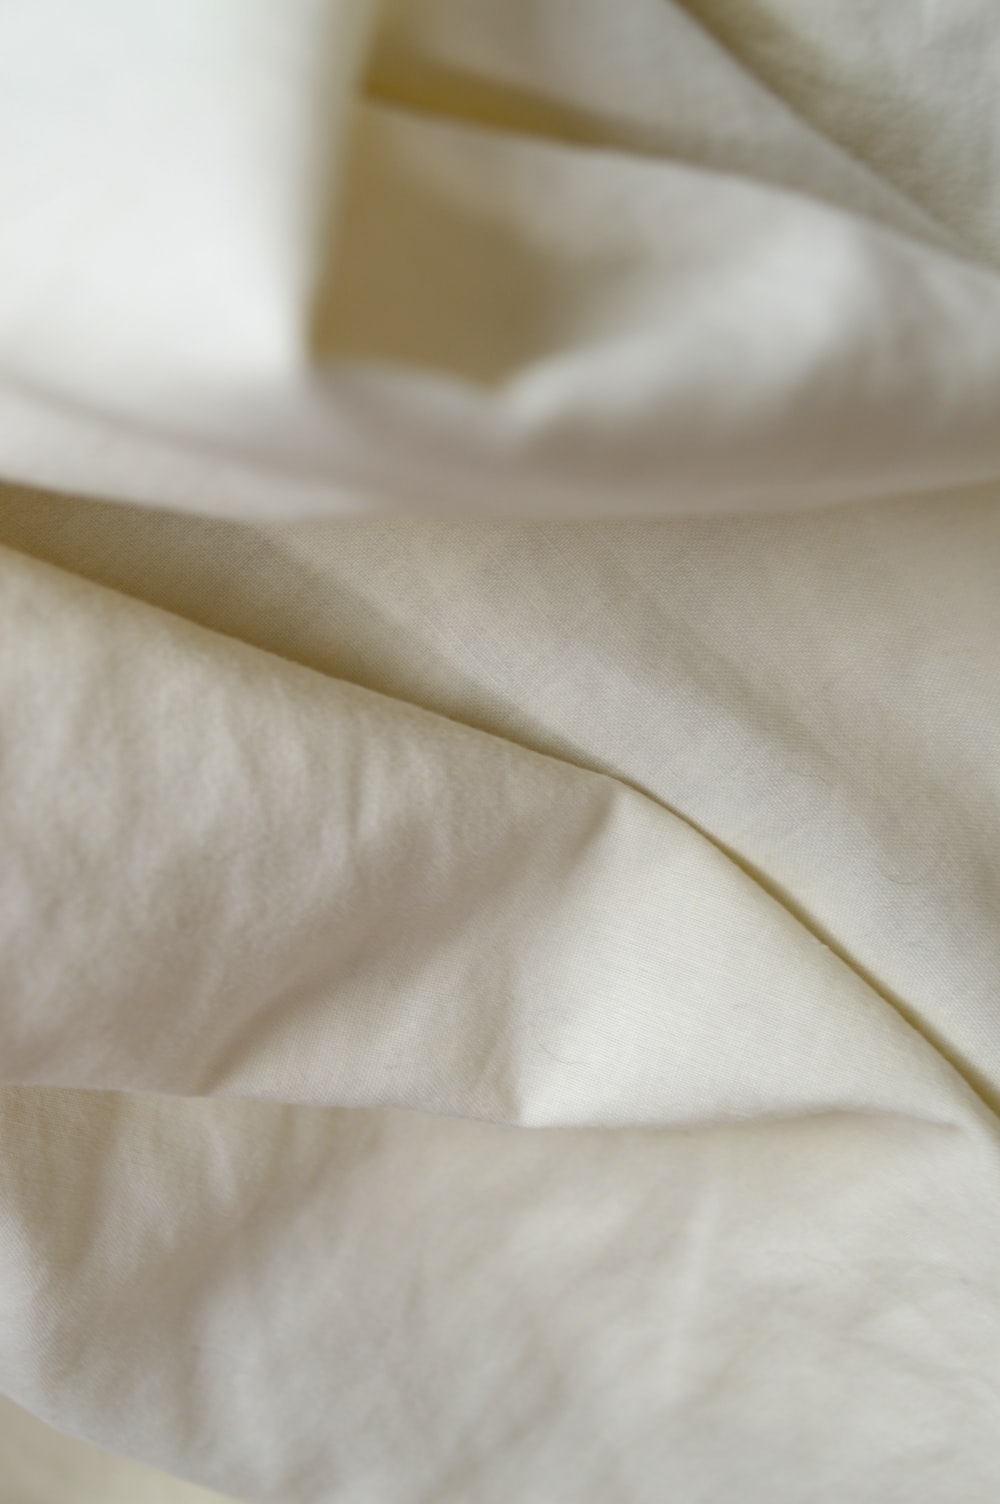 White Fabric Picture. Download Free Image